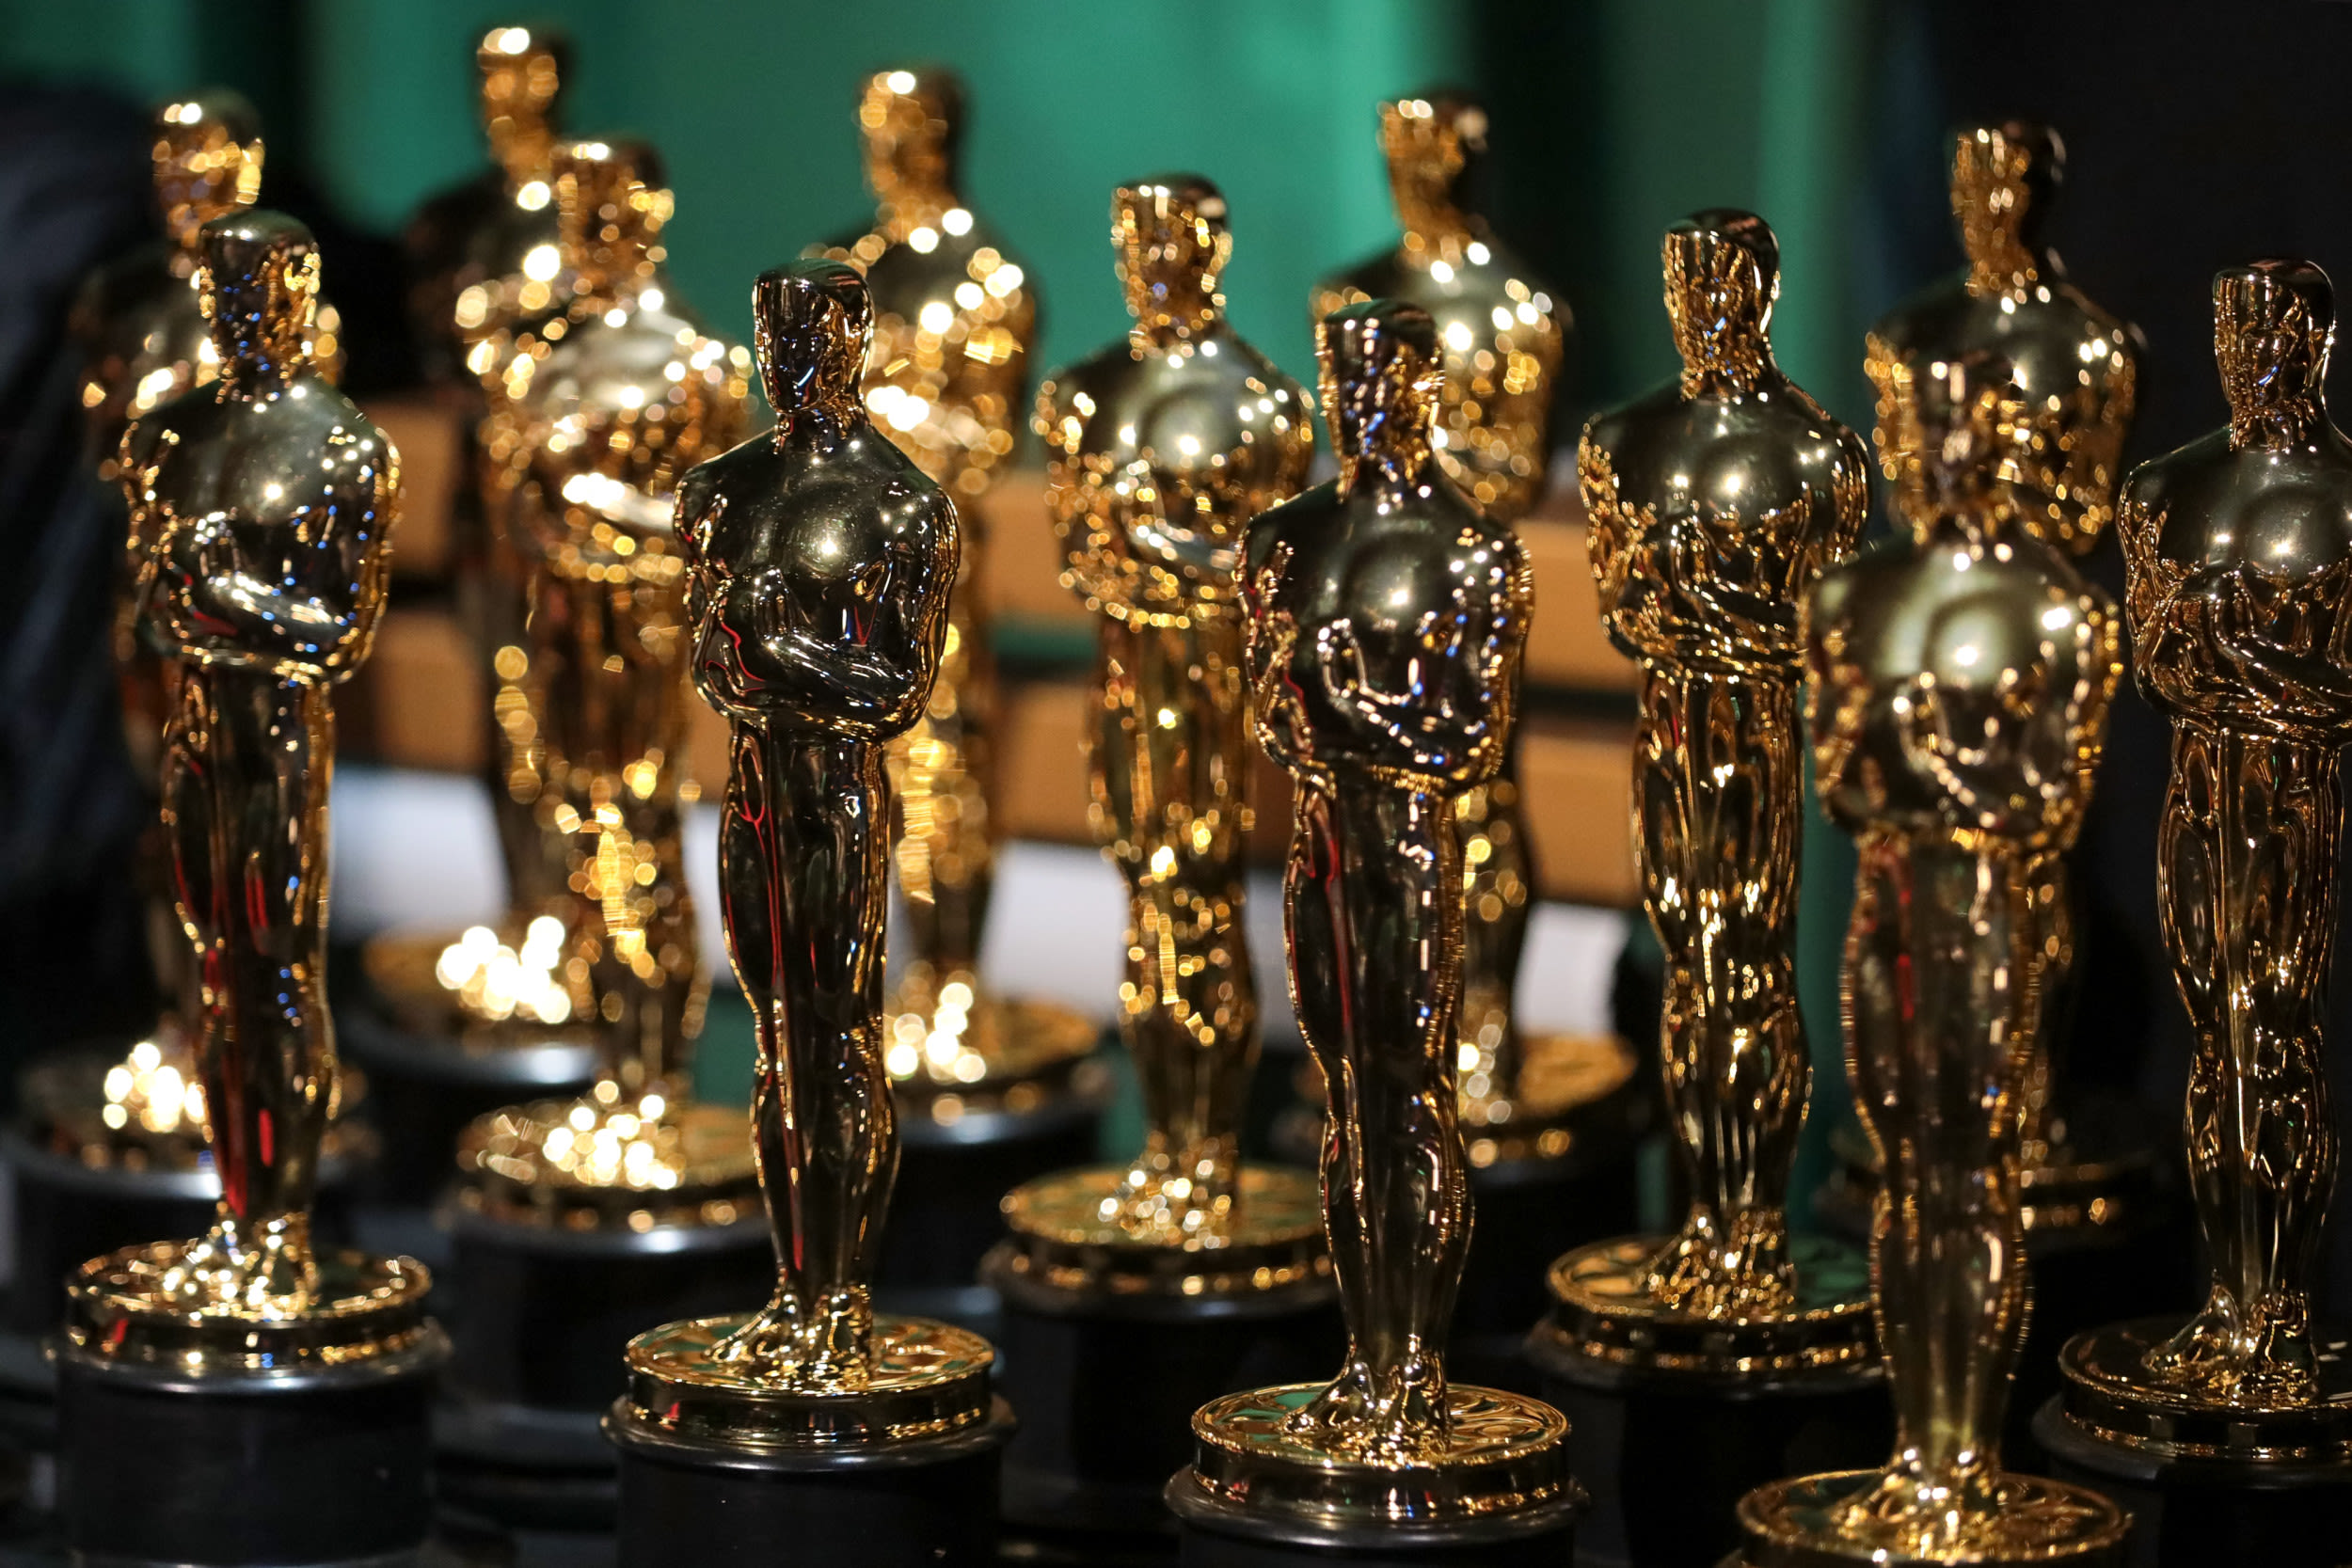 Oscars considering replacing best actor, actress with gender-neutral award